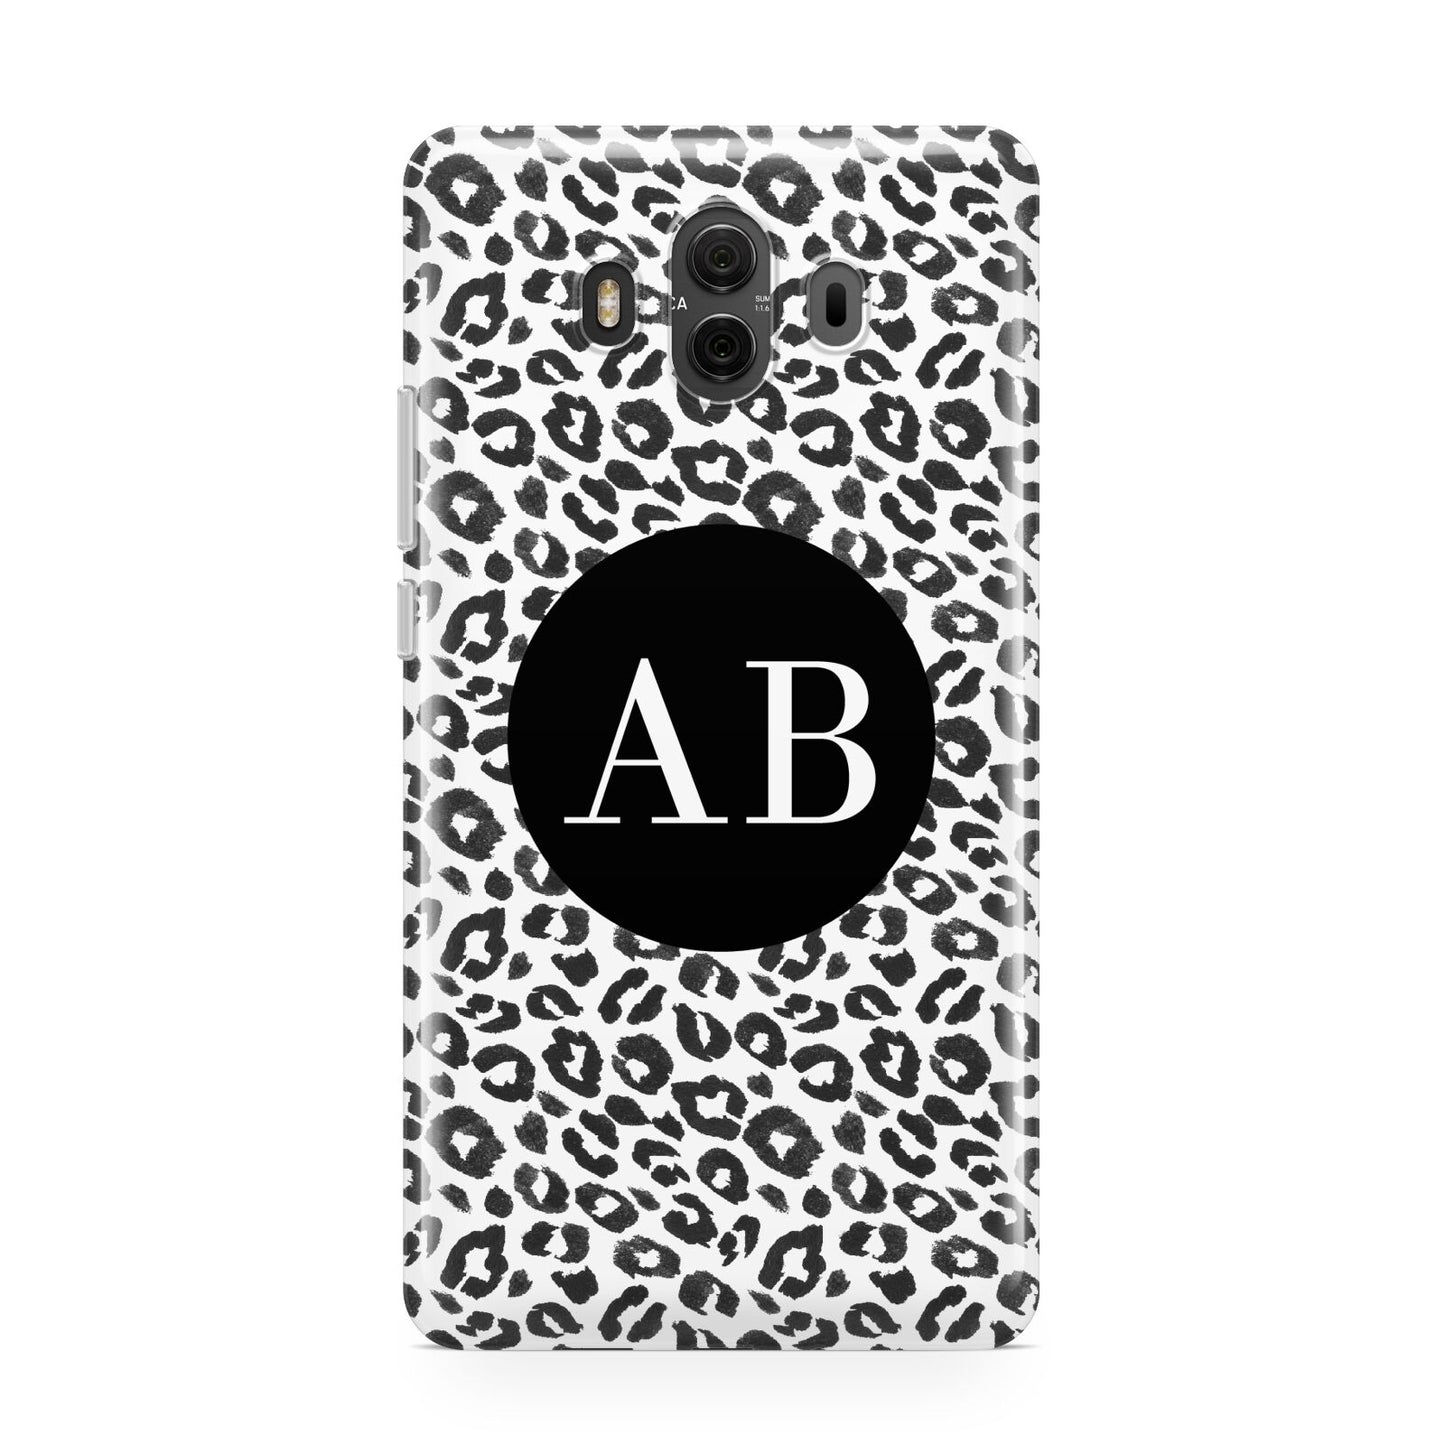 Leopard Print Black and White Huawei Mate 10 Protective Phone Case